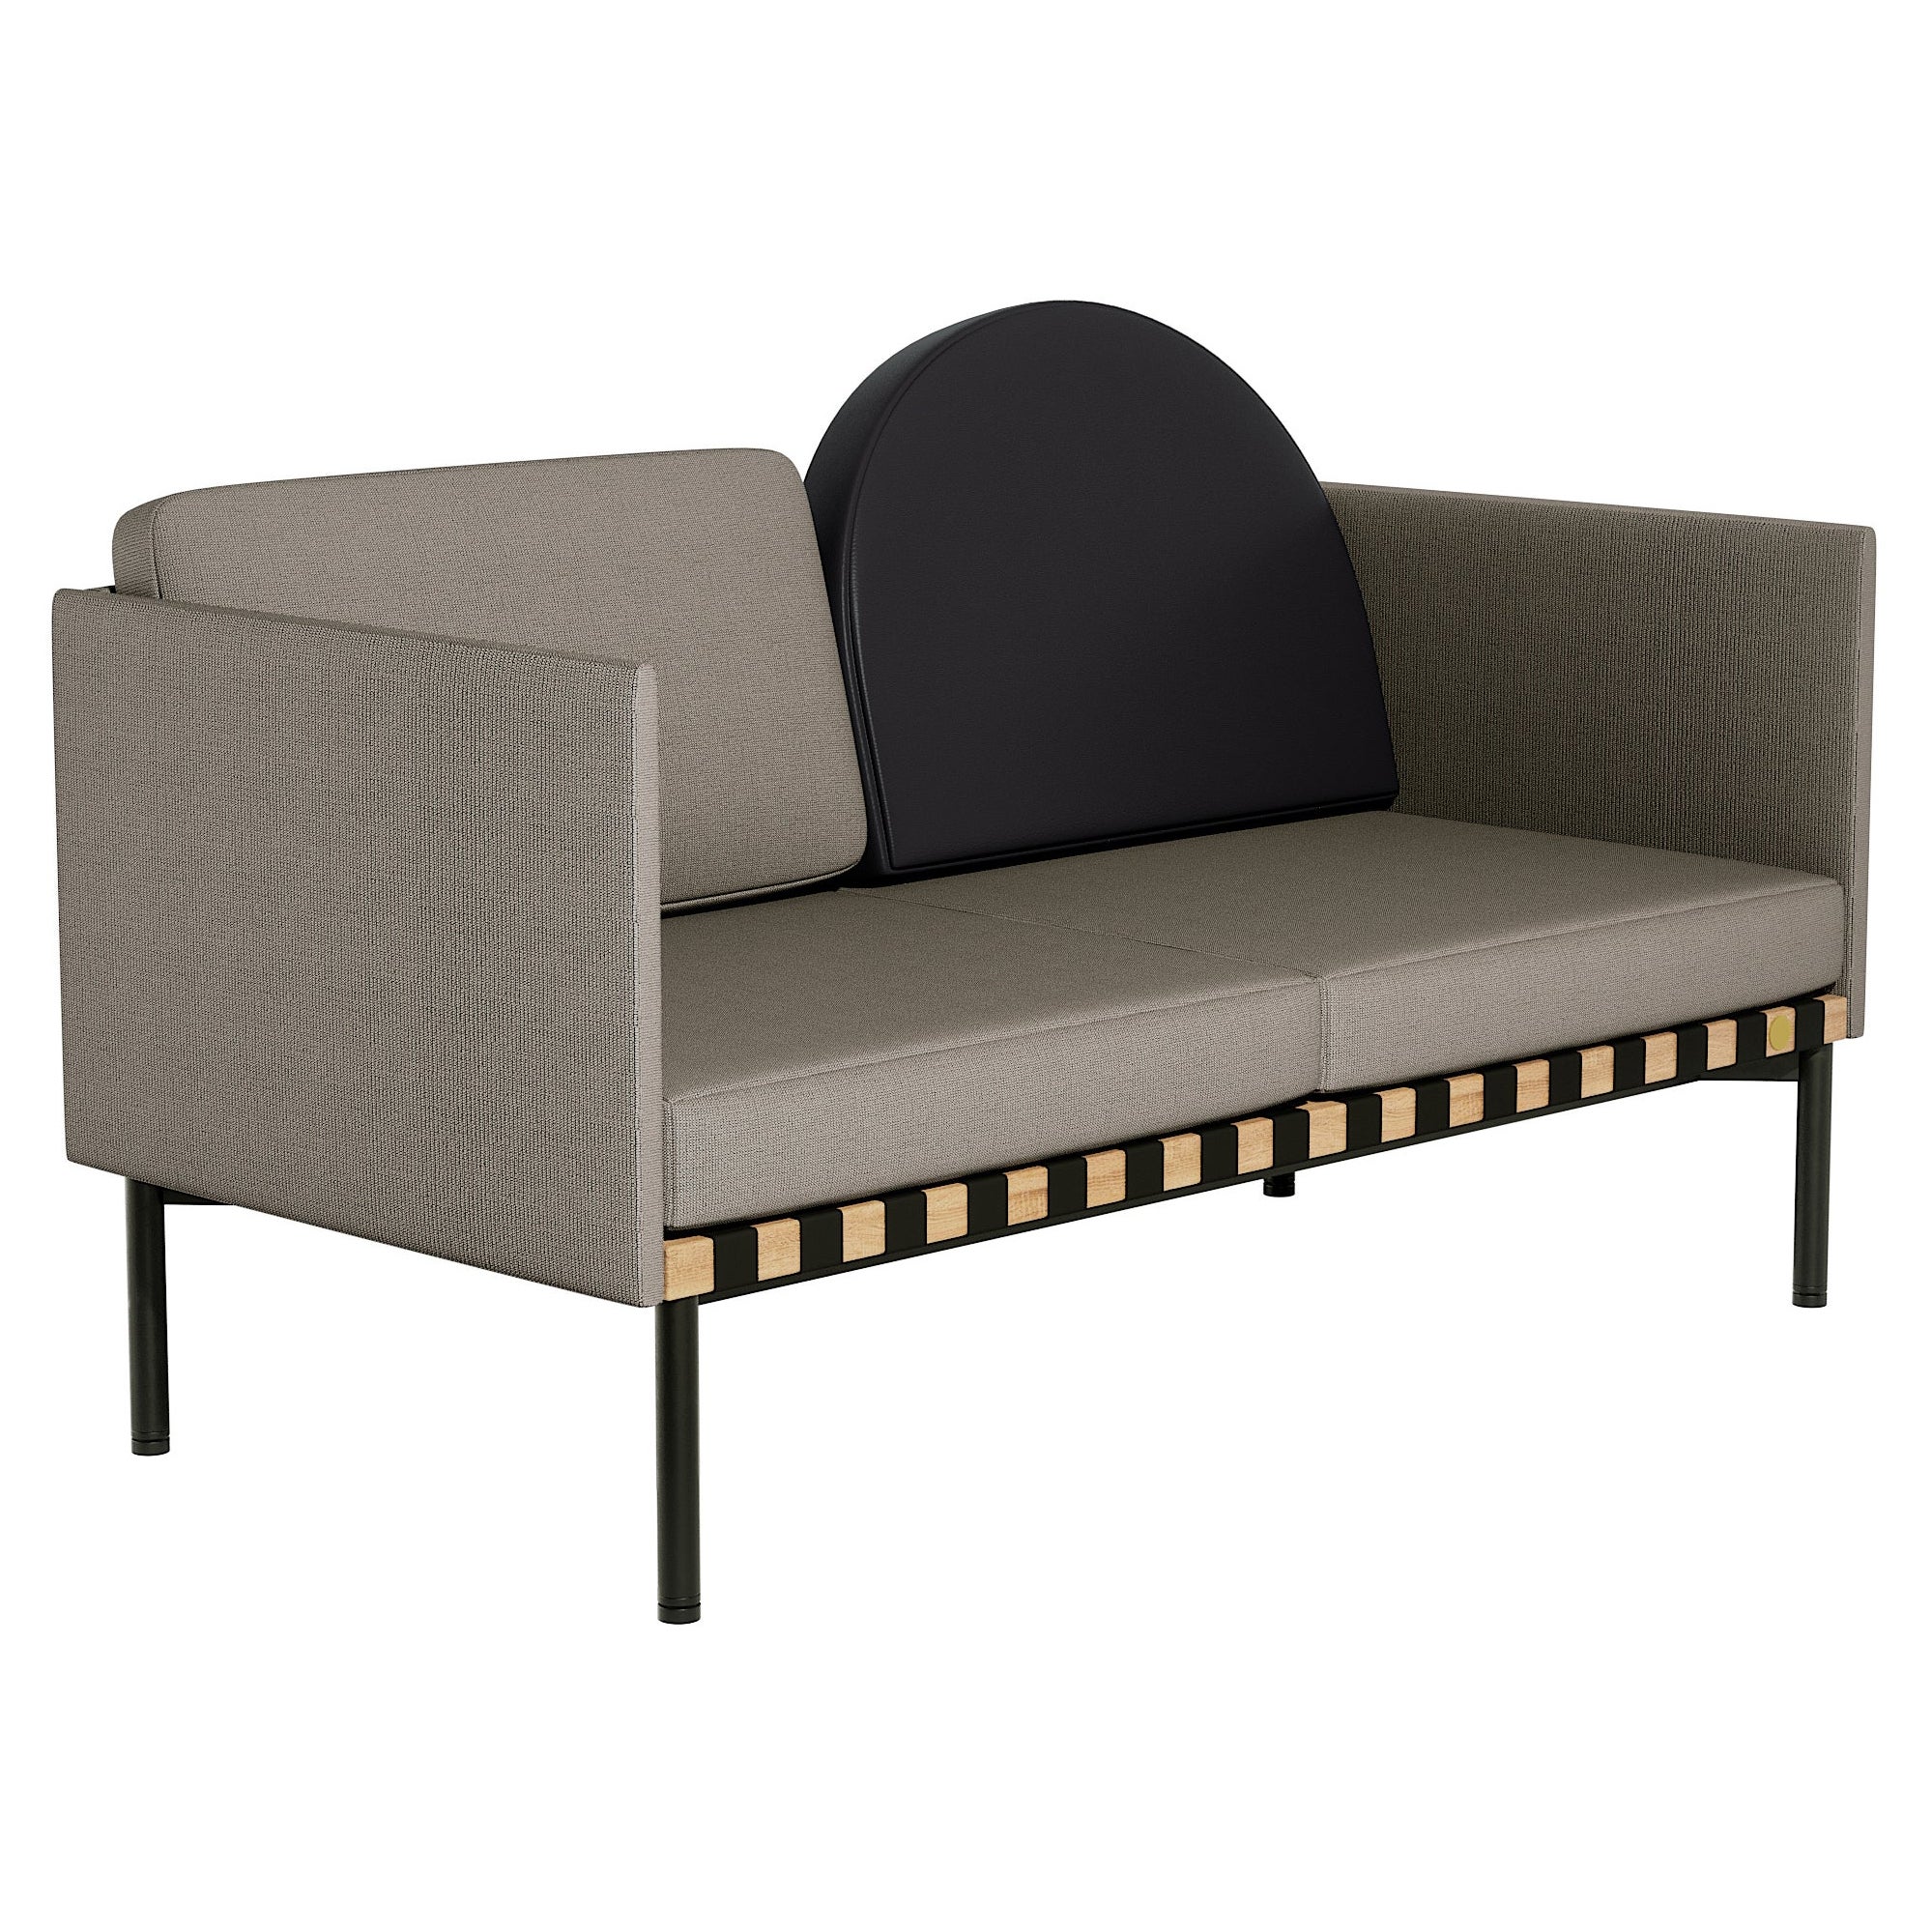 Petite Friture Grid 2 Seater Sofa with Armrest in Grey-Black by Studio Pool